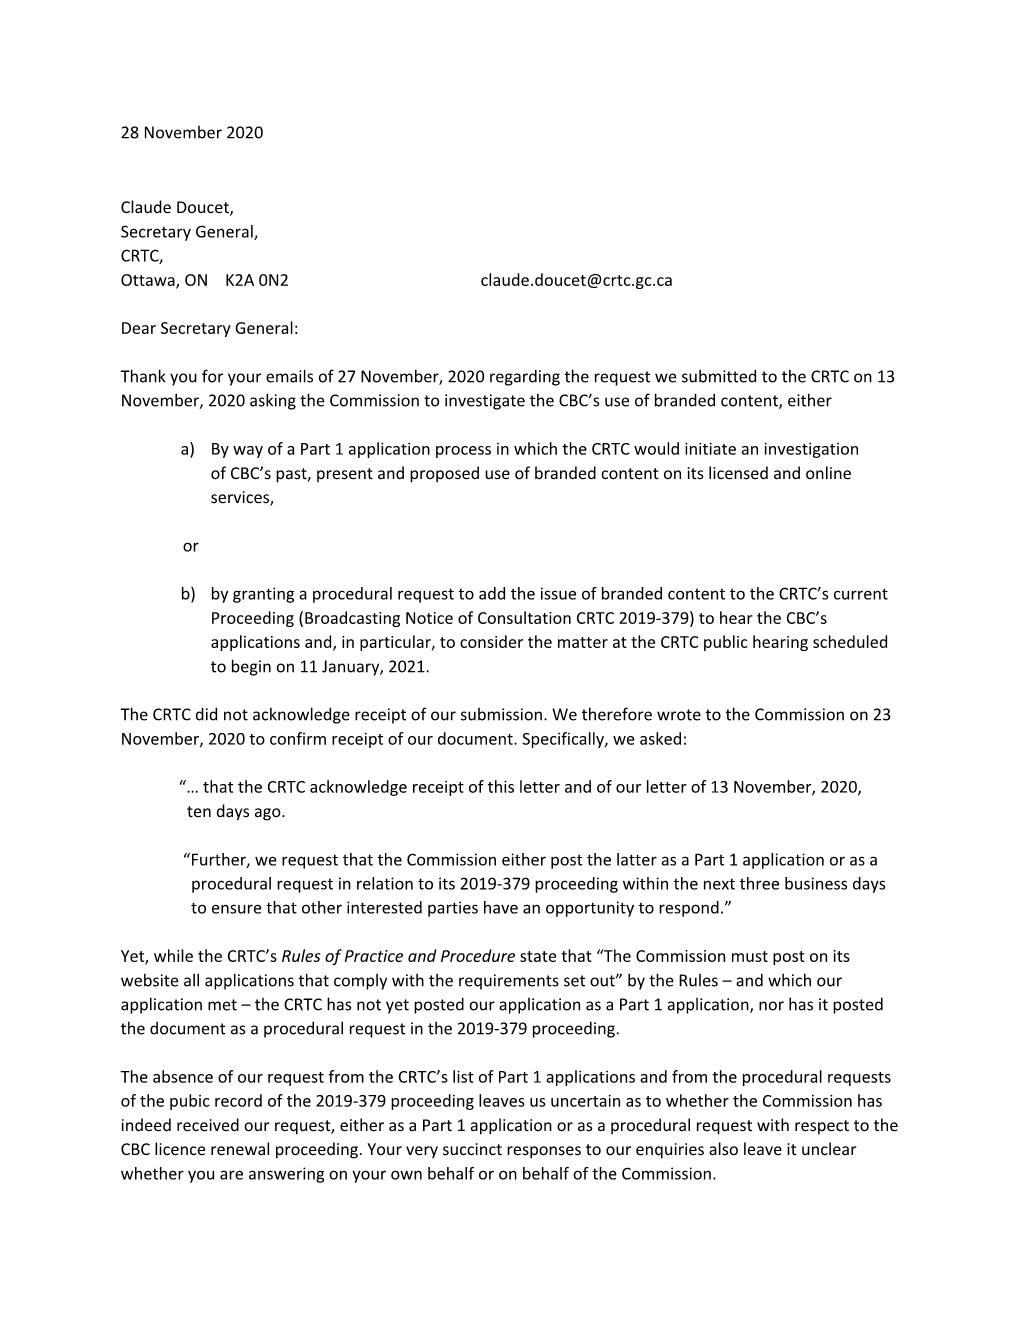 Letter from Former CBC Employees Asking CRTC to Acknowledge